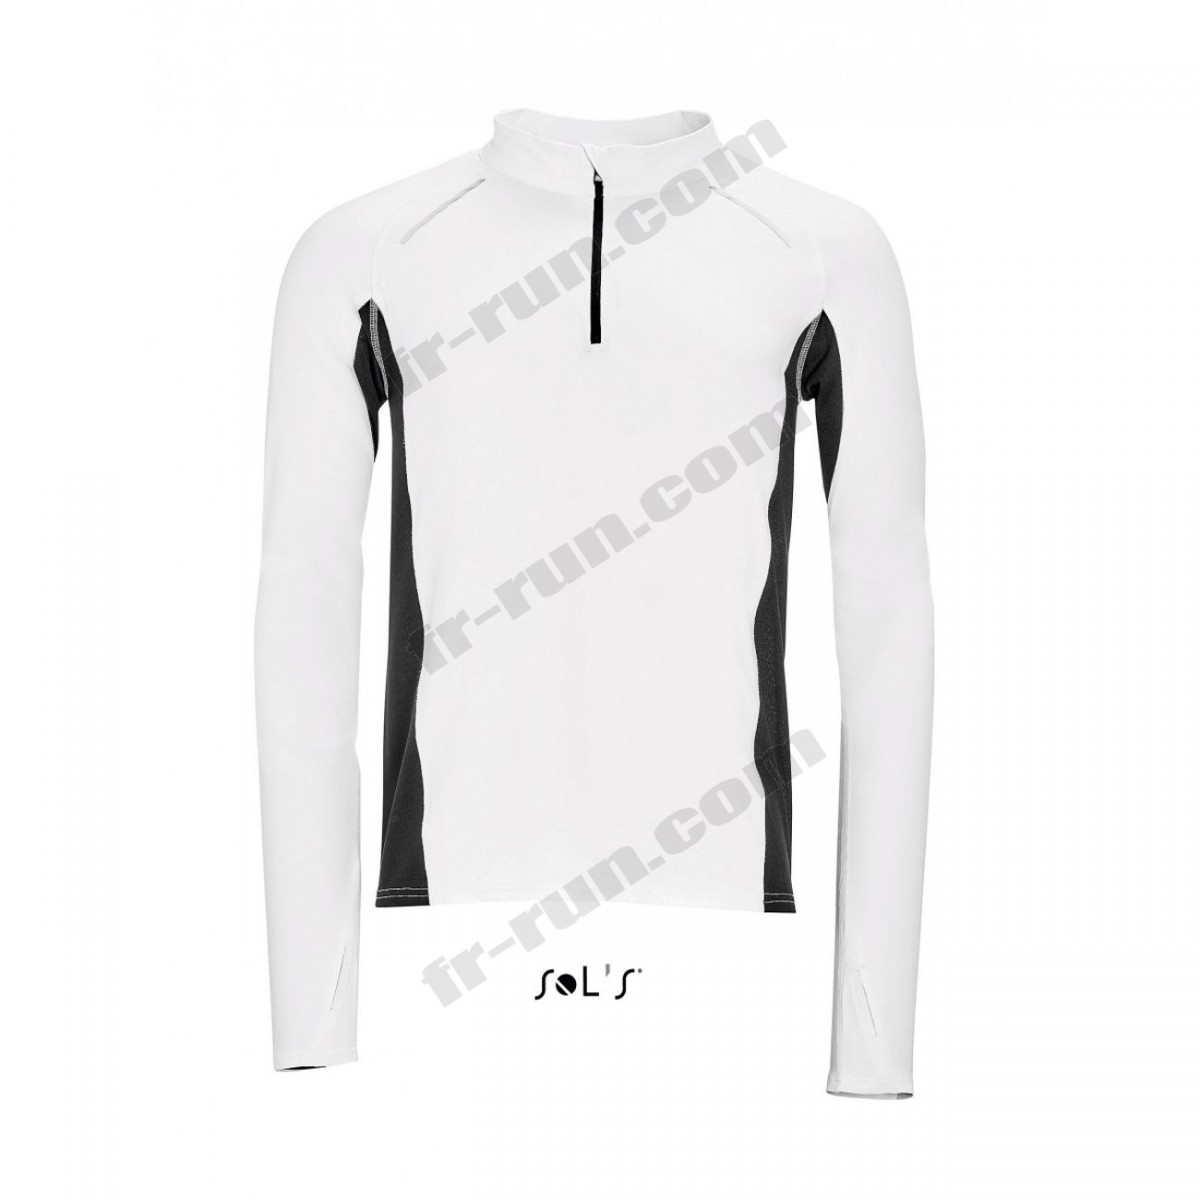 Sol's/running adulte SOL'S t-shirt running manches longues - Homme - 01416 - blanc √ Nouveau style √ Soldes - -0